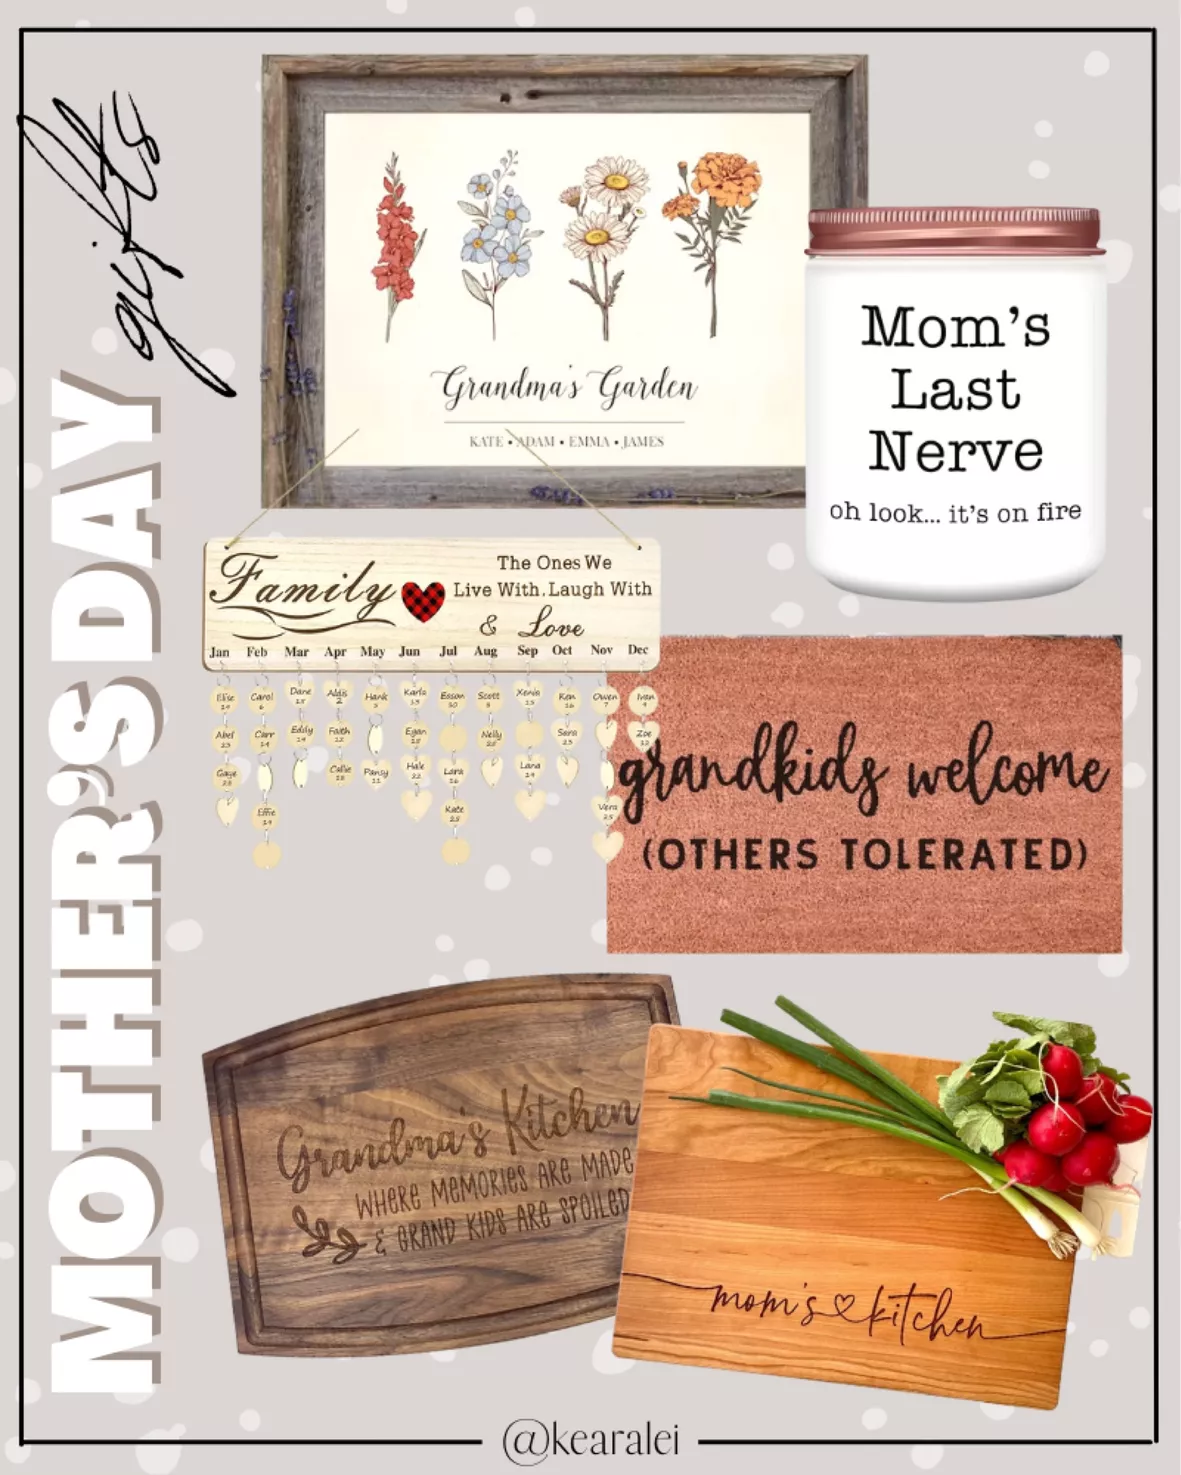 Birth Flower Gifts for Mom, Personalized Cutting Board, Mom Gifts